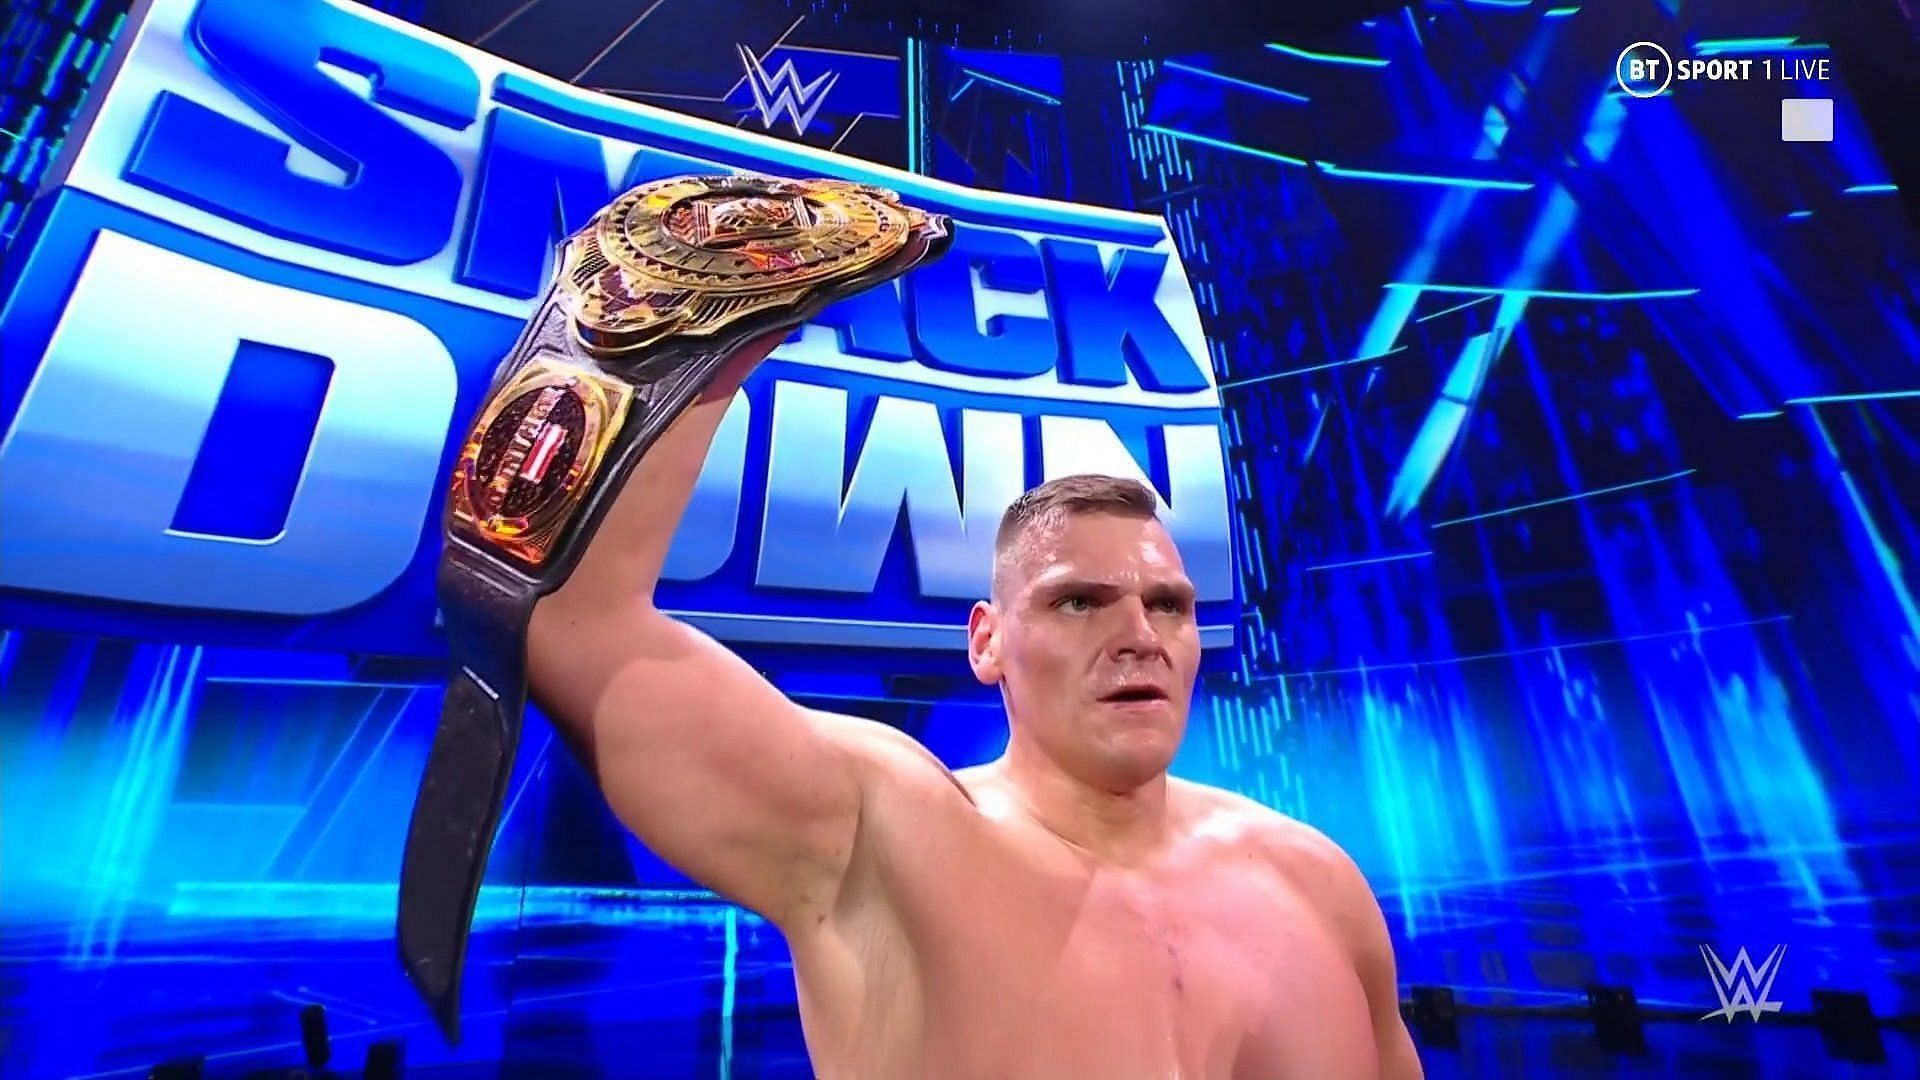 Gunther holding his Intercontinental title.